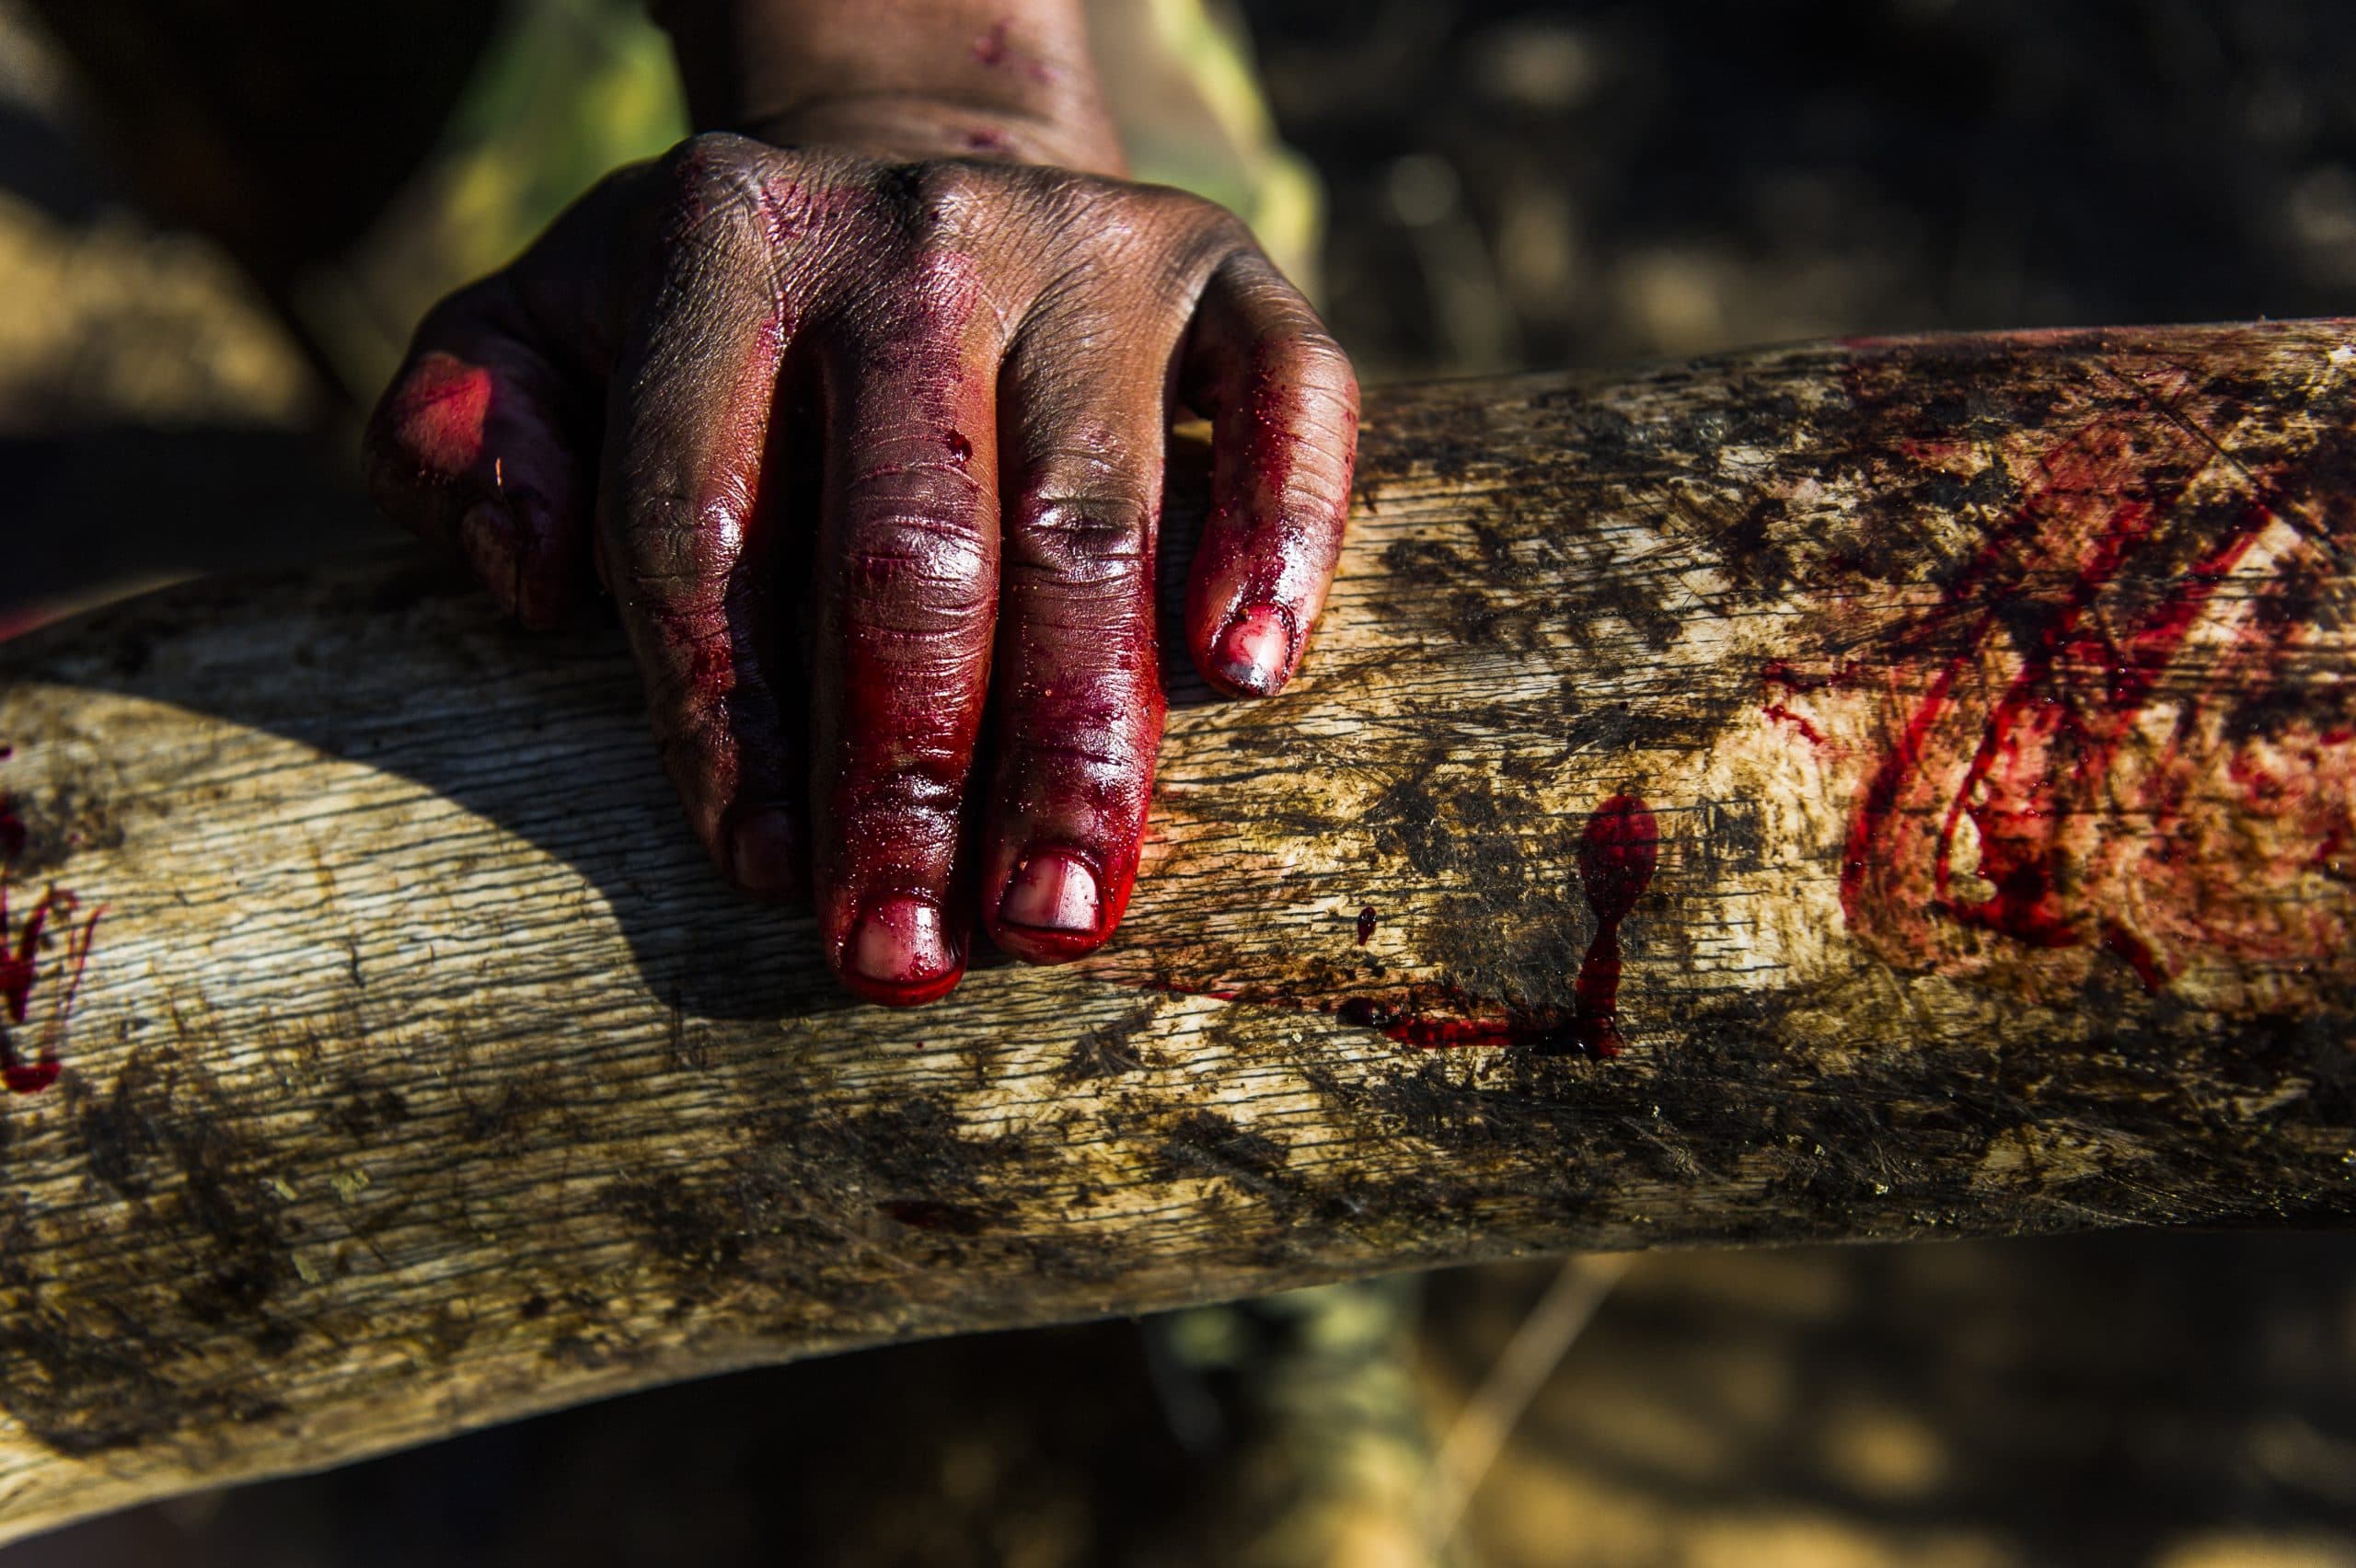 A ranger’s bloody hand rests on an ivory tusk during an anti-poaching mission in KwaZulu-Natal, South Africa © Britta Jaschinski / Photographers Against Wildlife Crime™